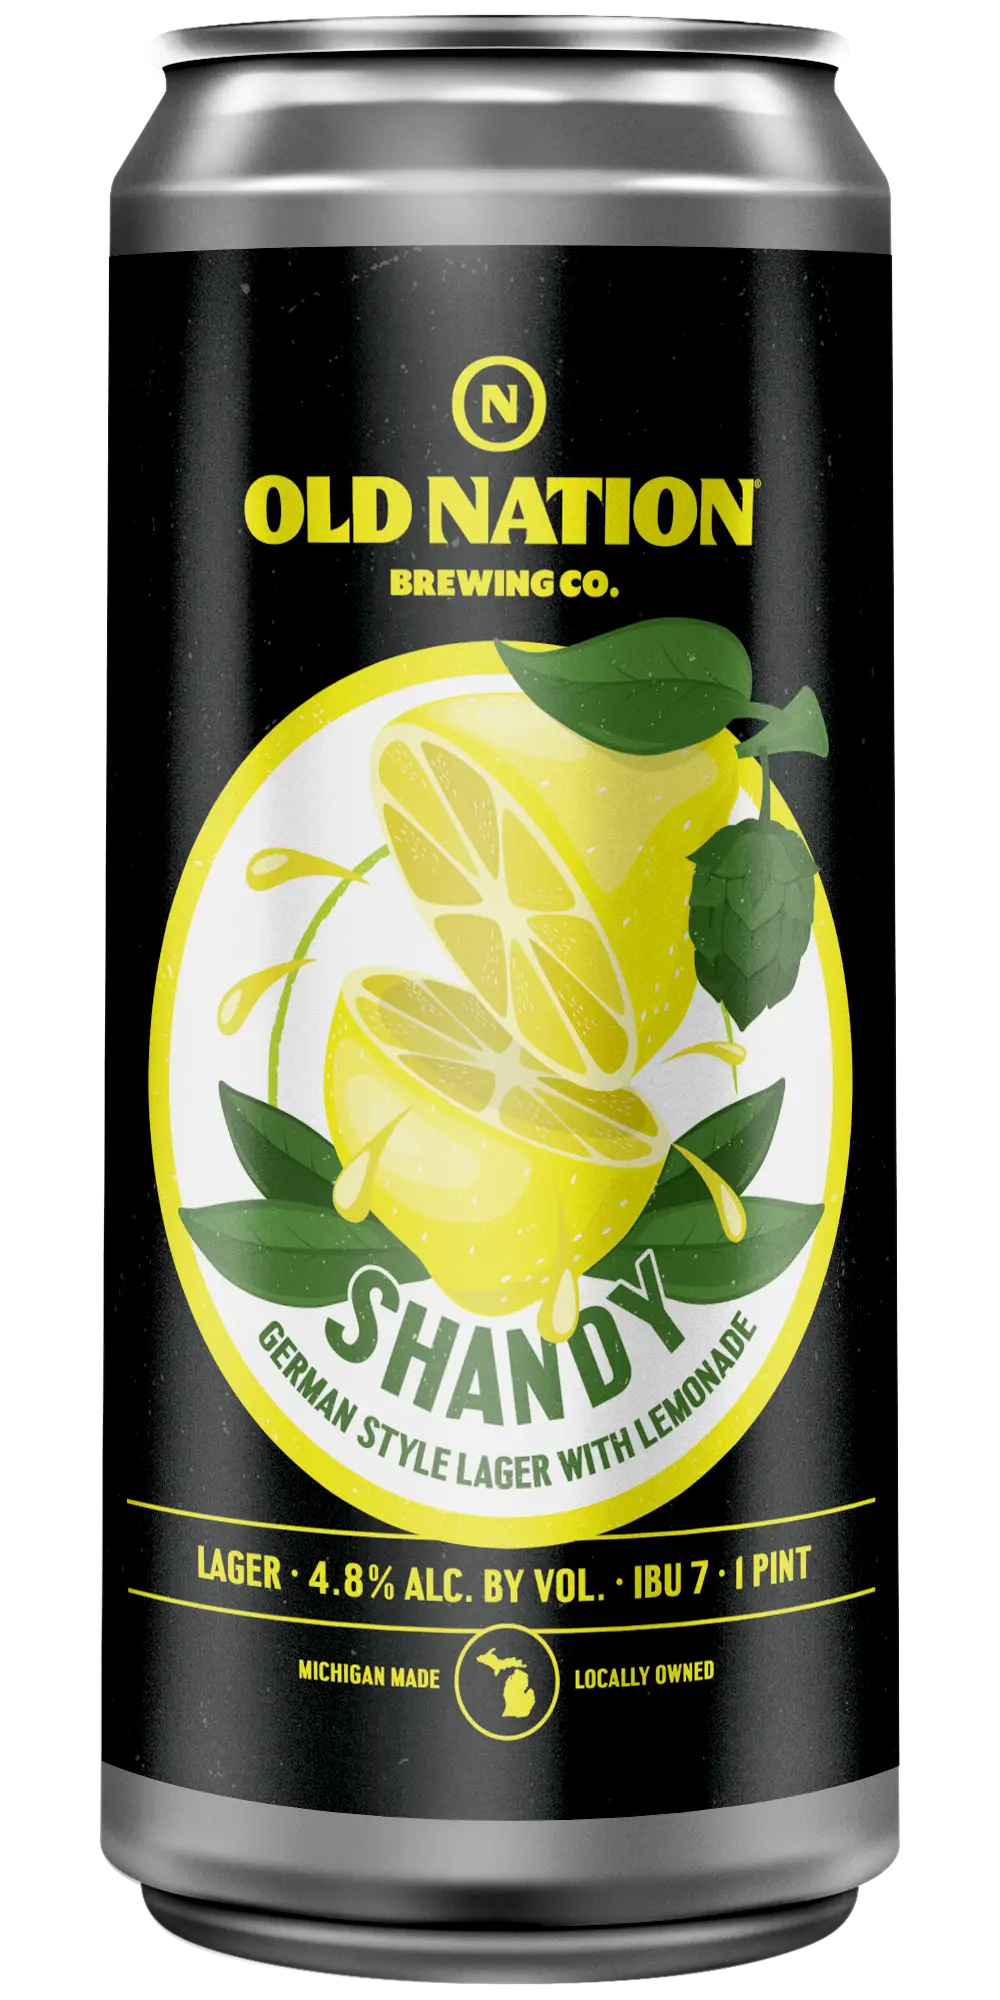 Old Nation Shandy beer in an aluminum can. Drawing of a lemon cut in half on the can label.